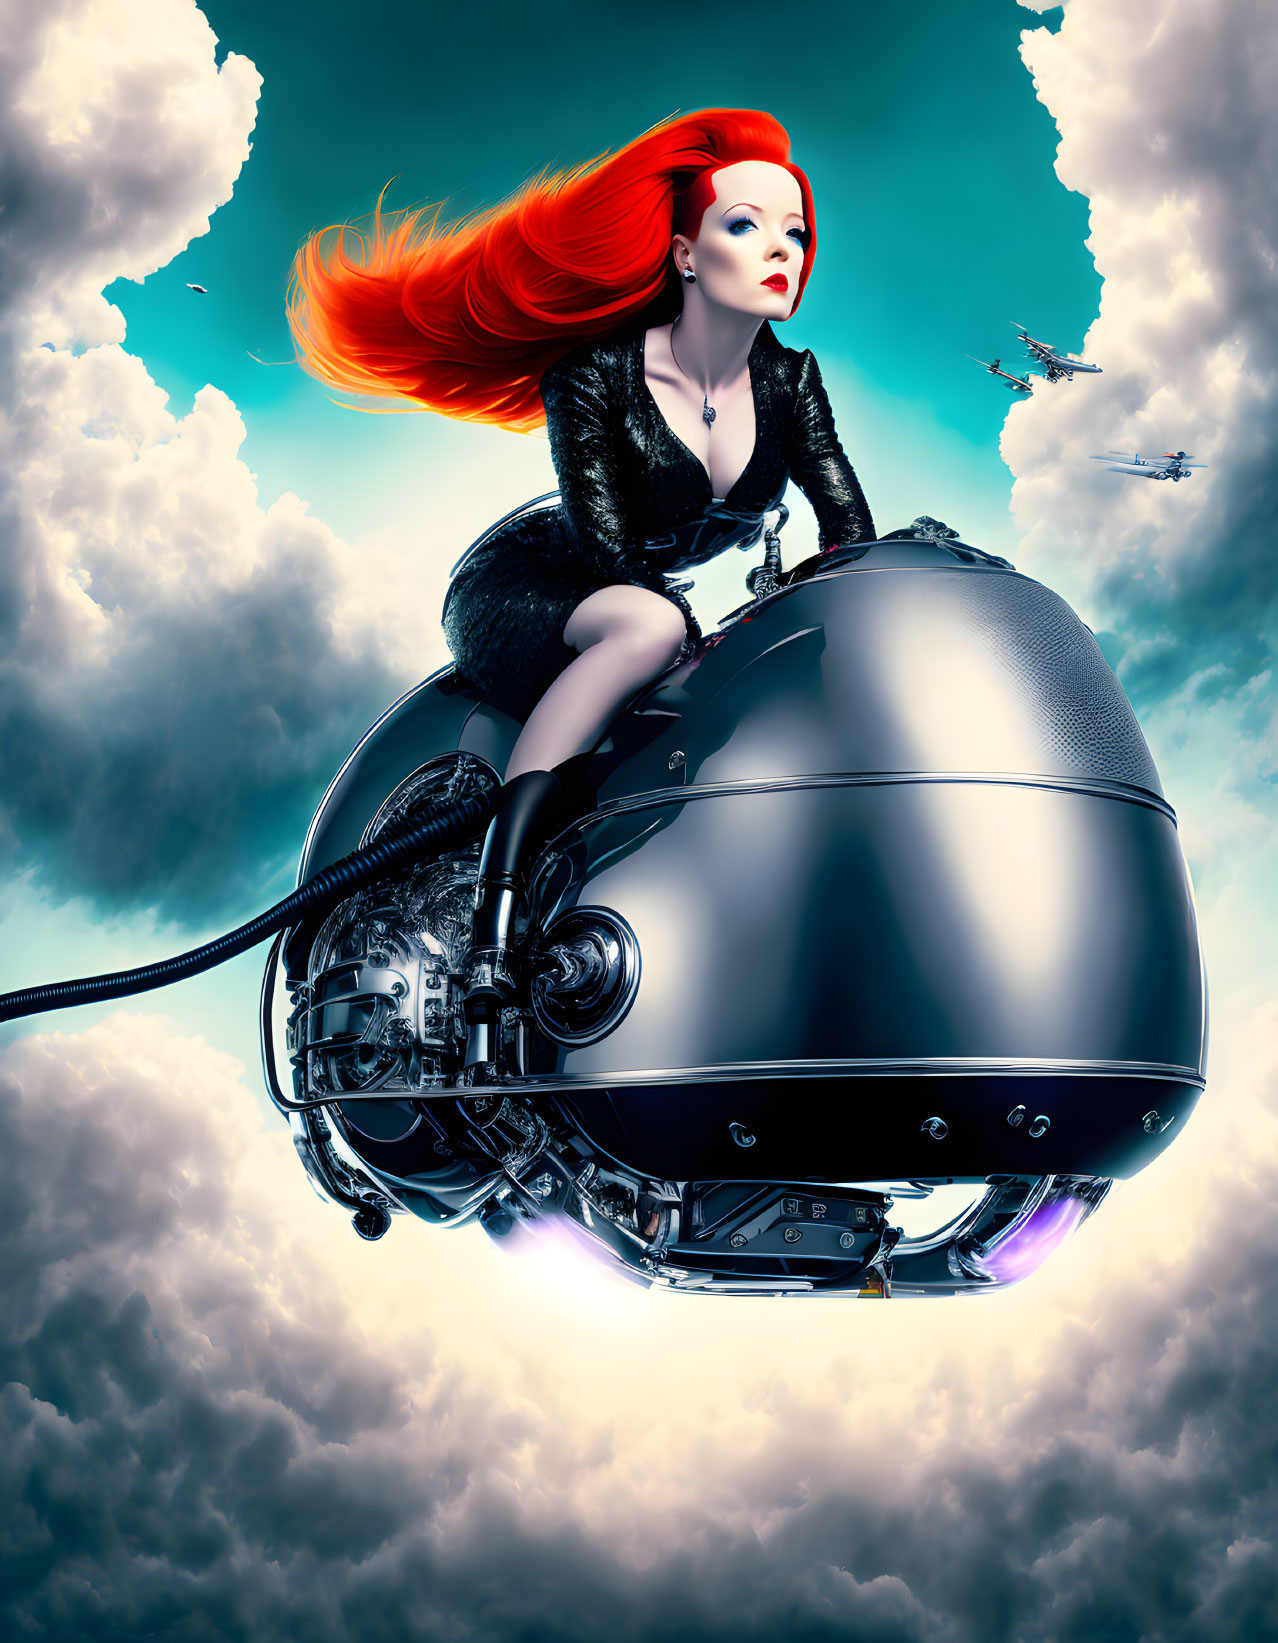 Red-haired woman on spherical motorcycle in sky with plane